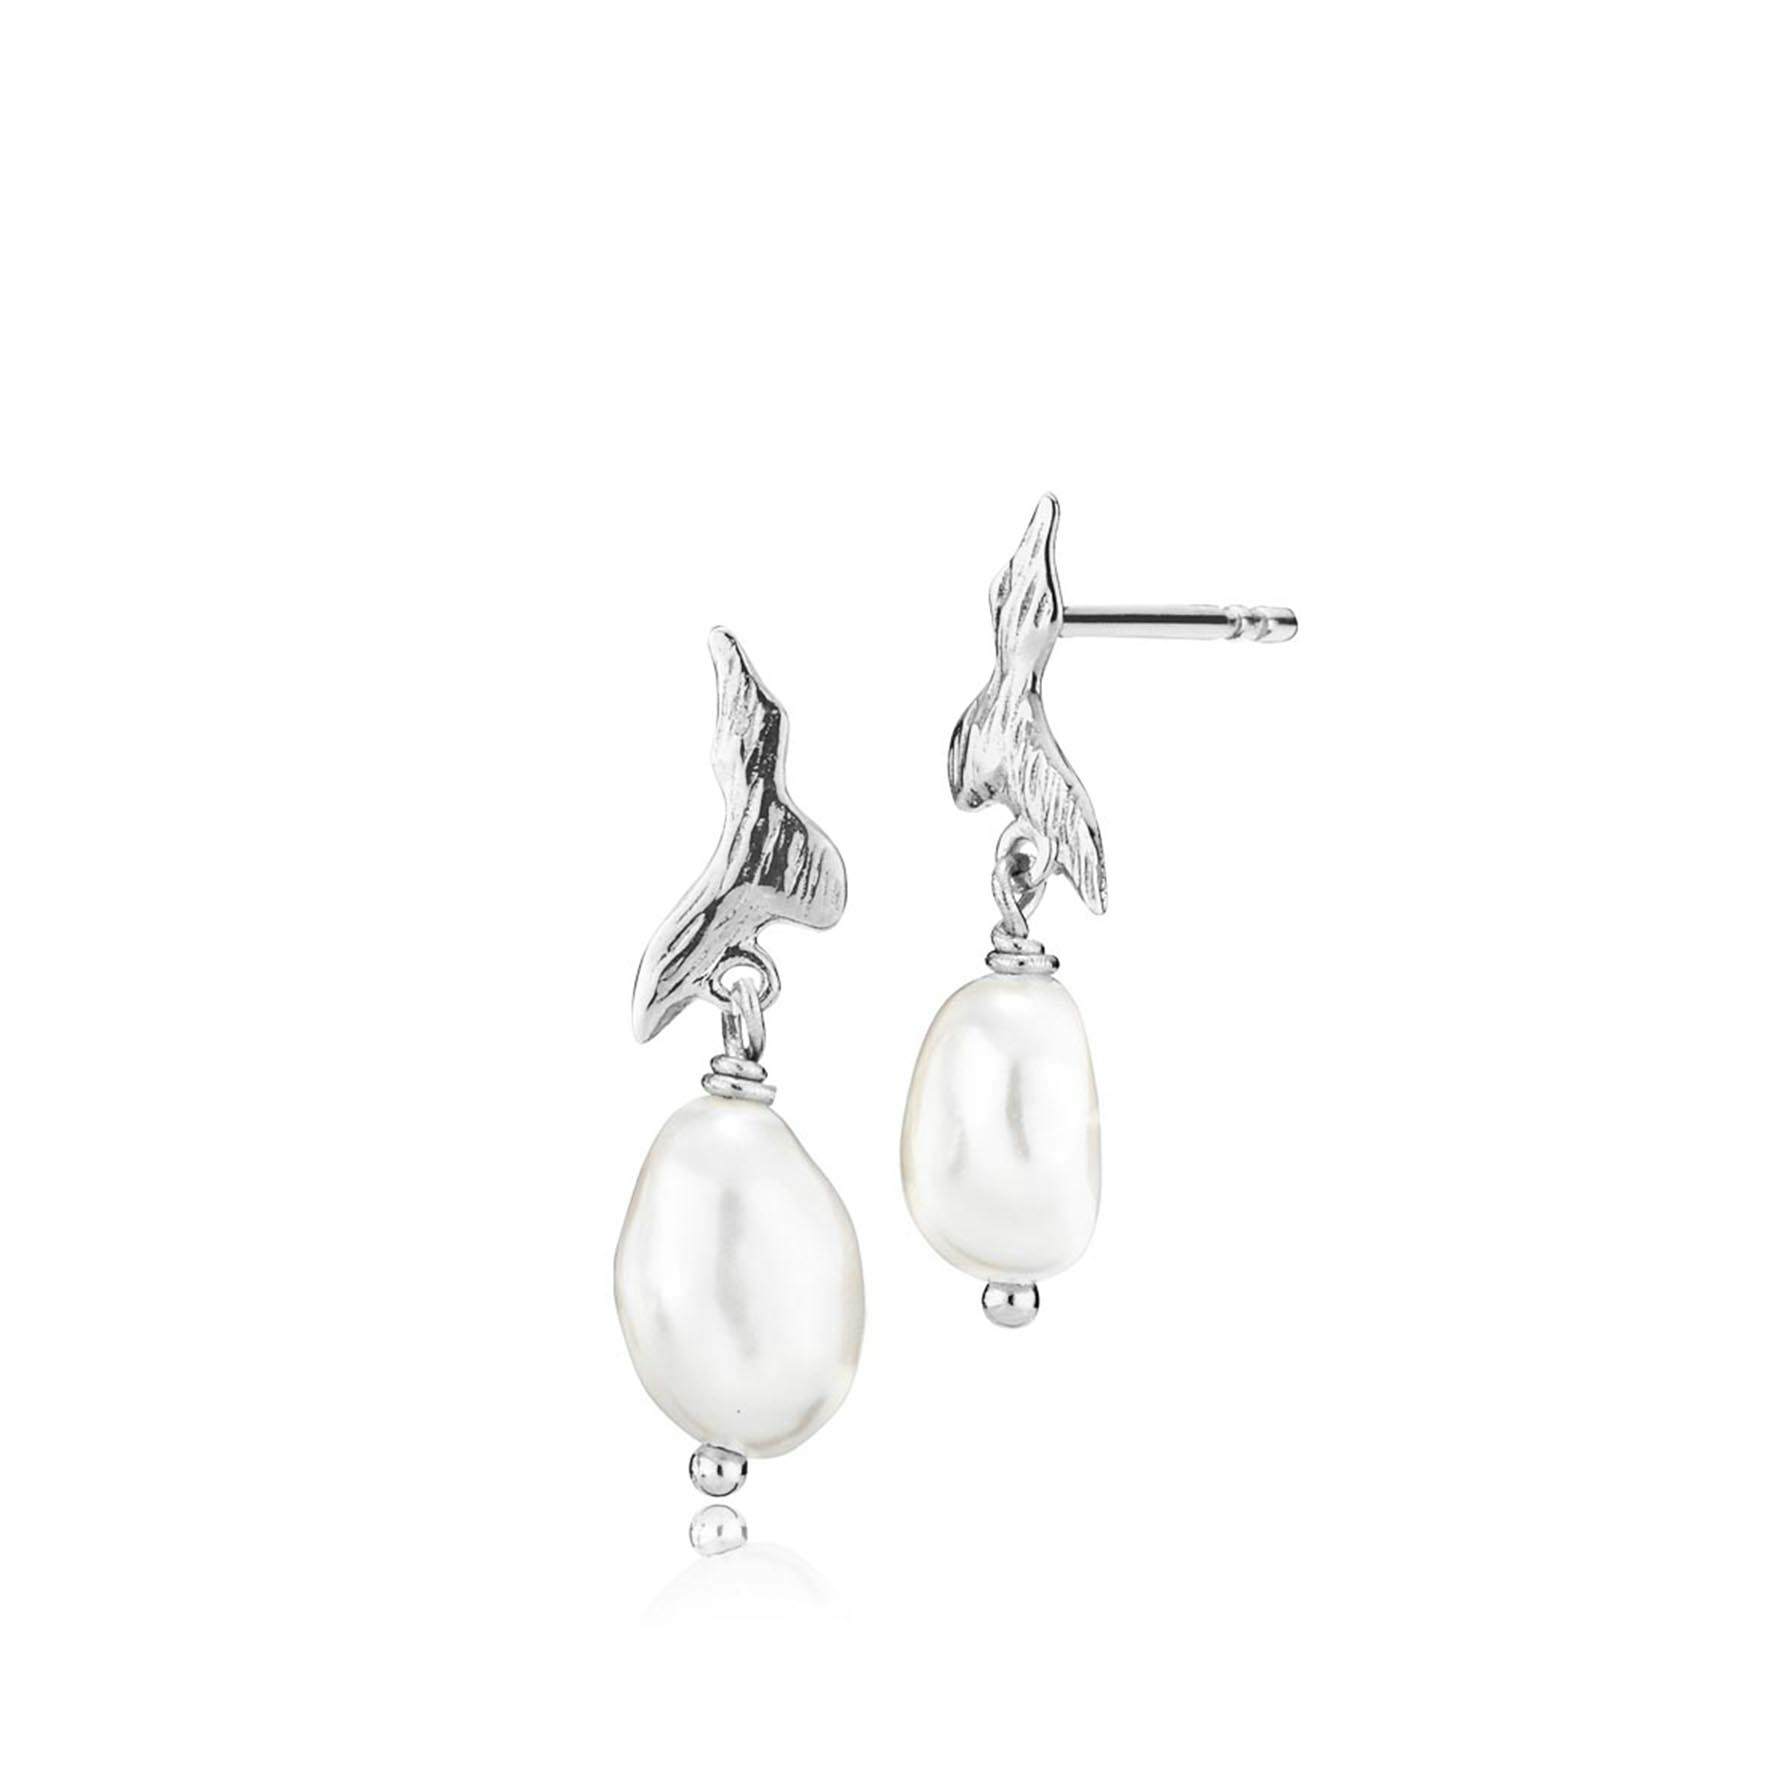 Fairy Earrings With Pearl från Izabel Camille i Silver Sterling 925|Freshwater Pearl